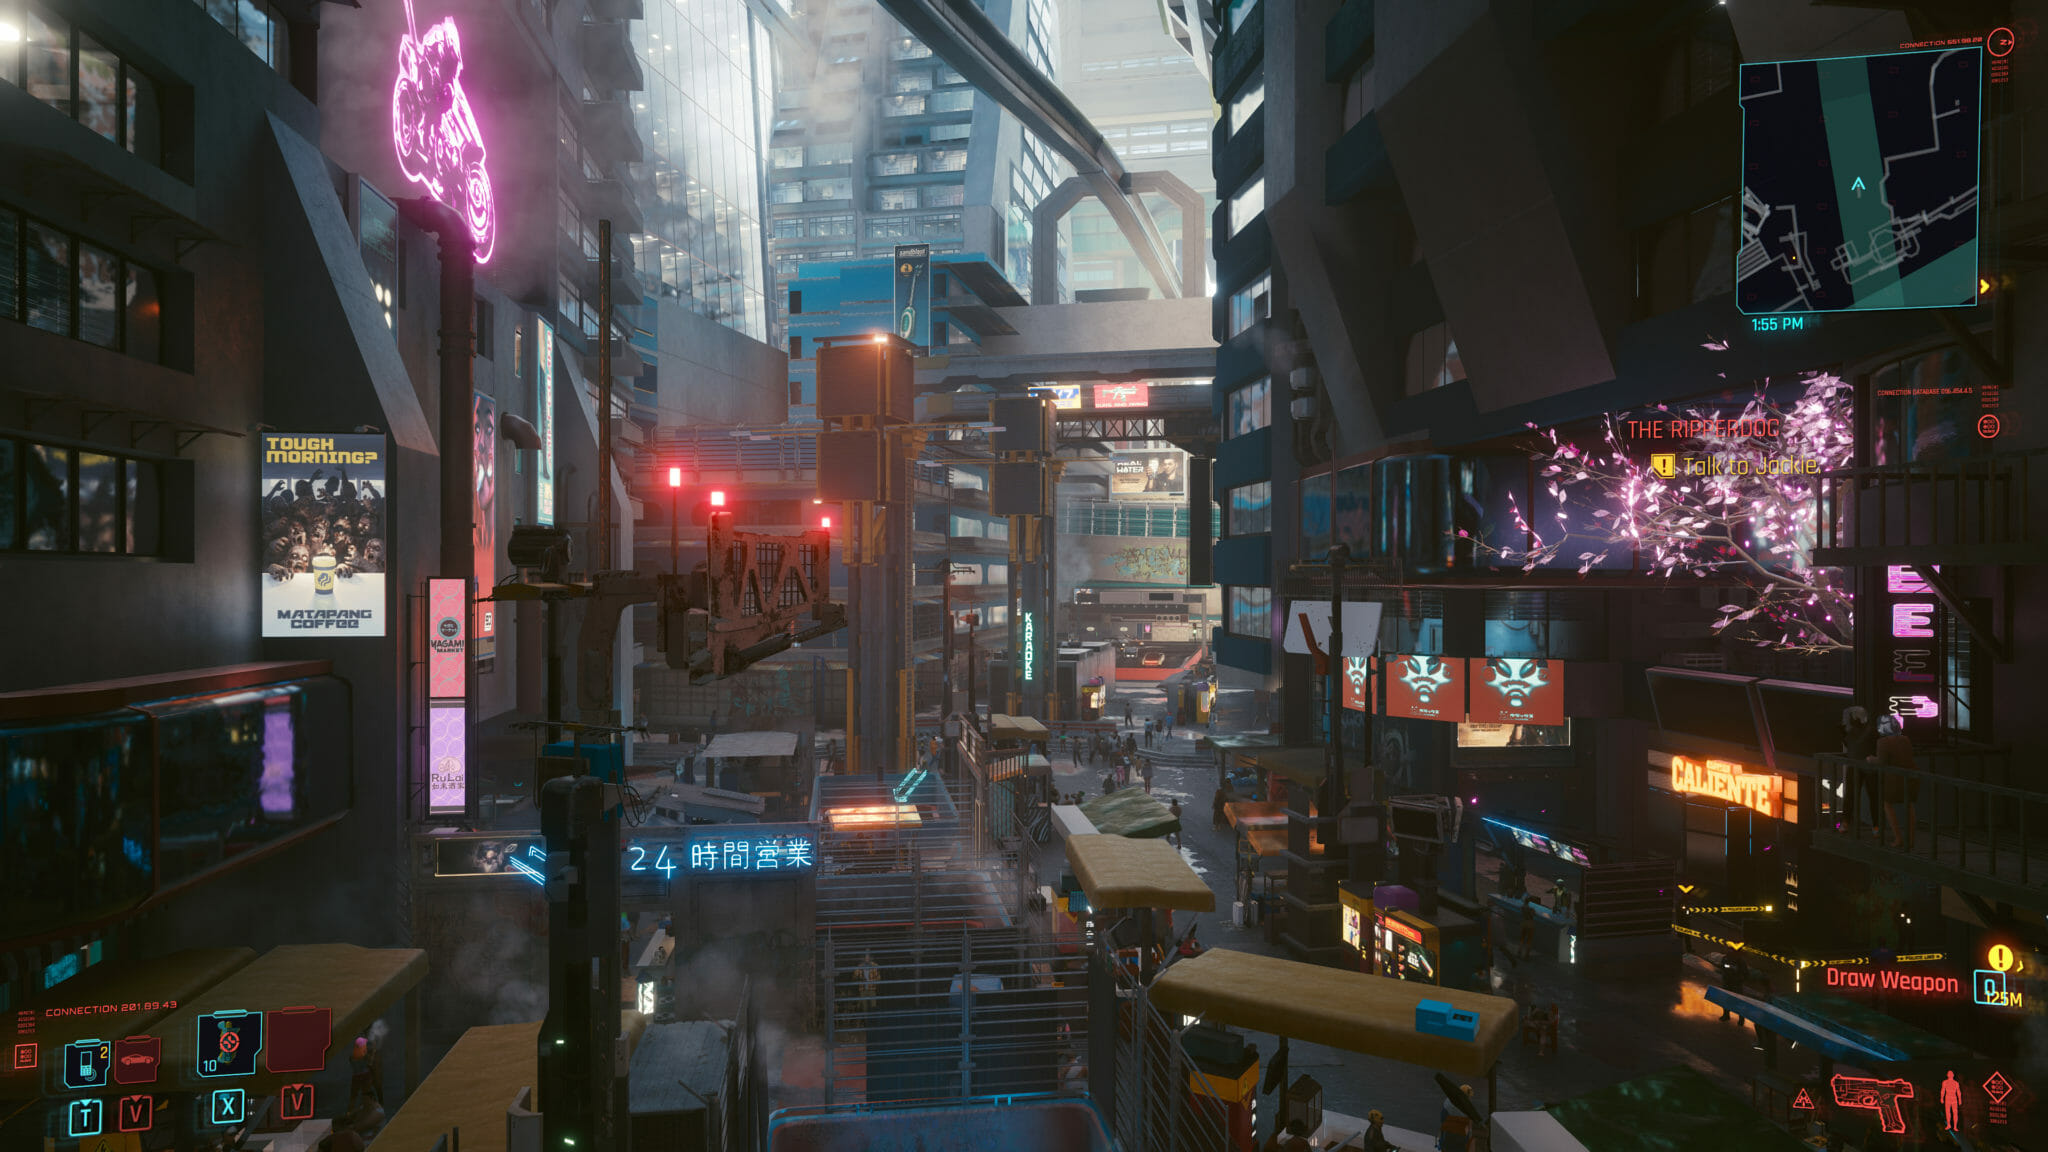 How to increase the Cyberpunk 2077 Draw Distance on PC